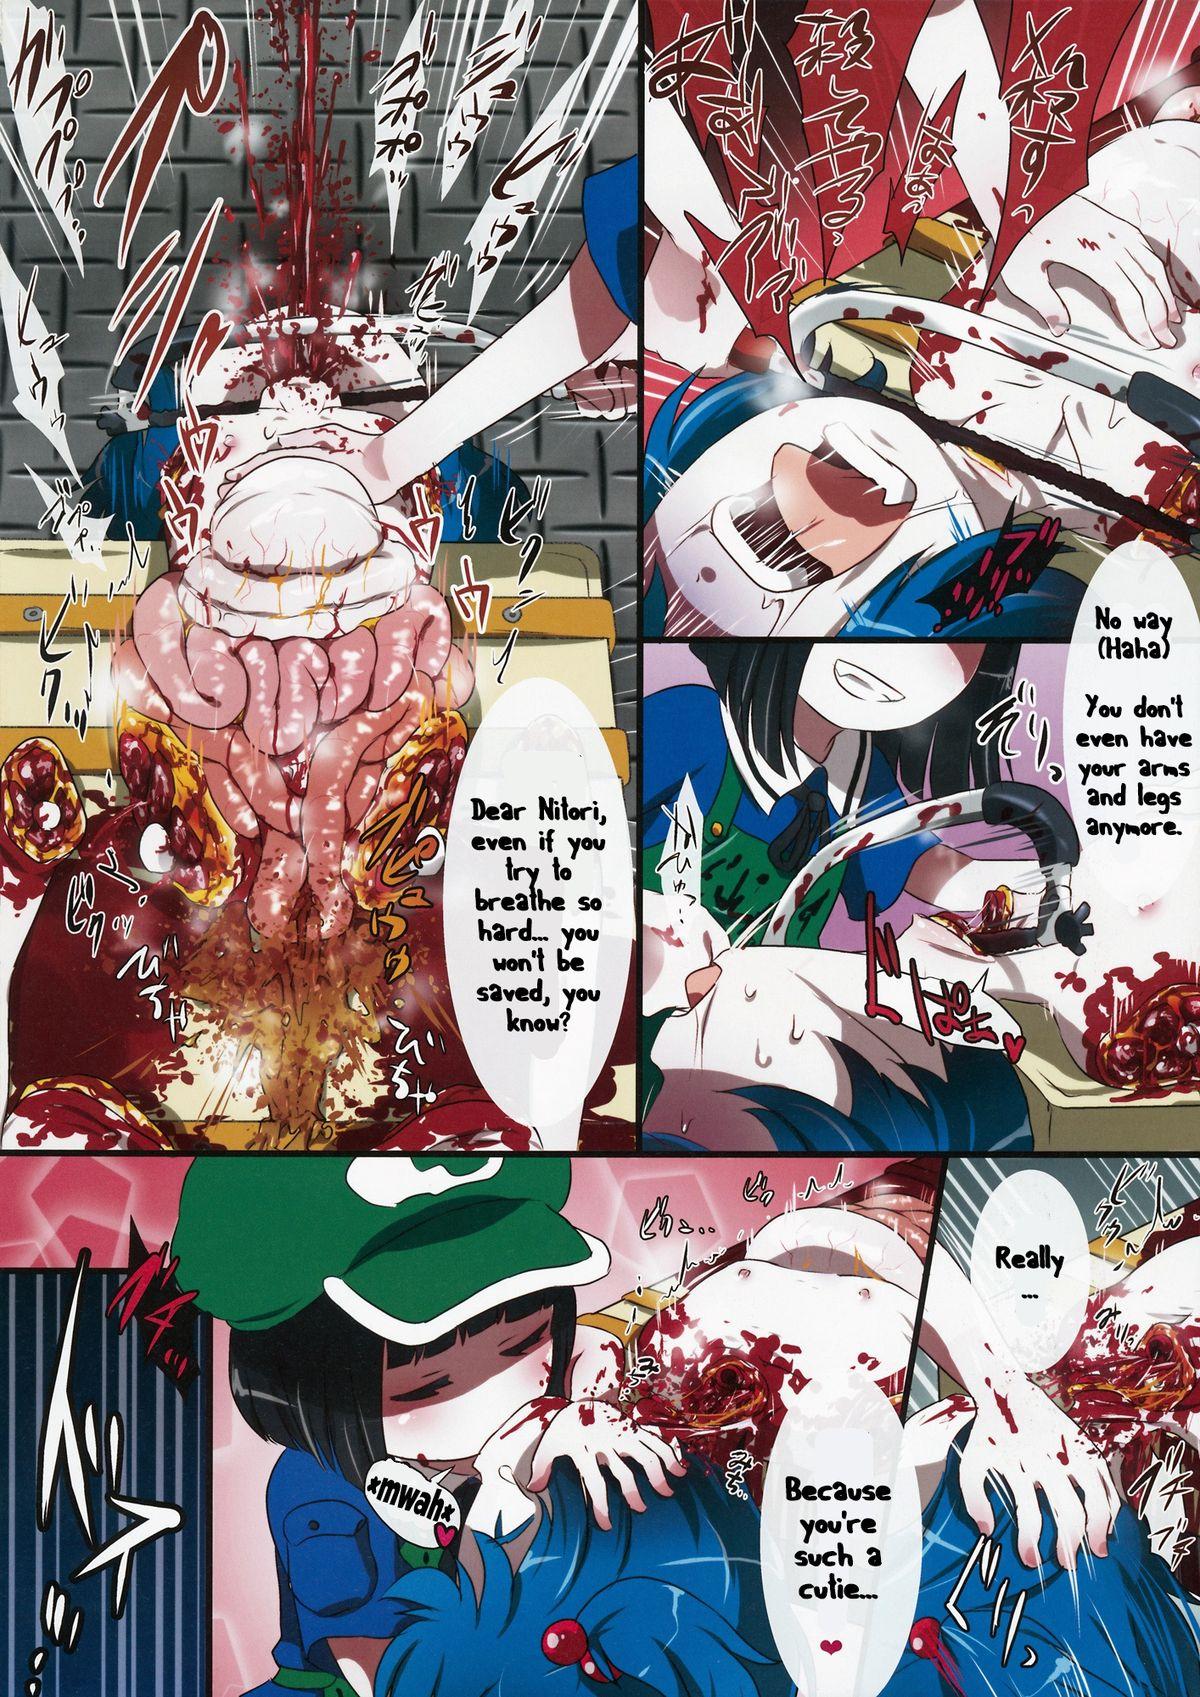 Ballbusting 0210564801 - Touhou project Beurette - Page 8